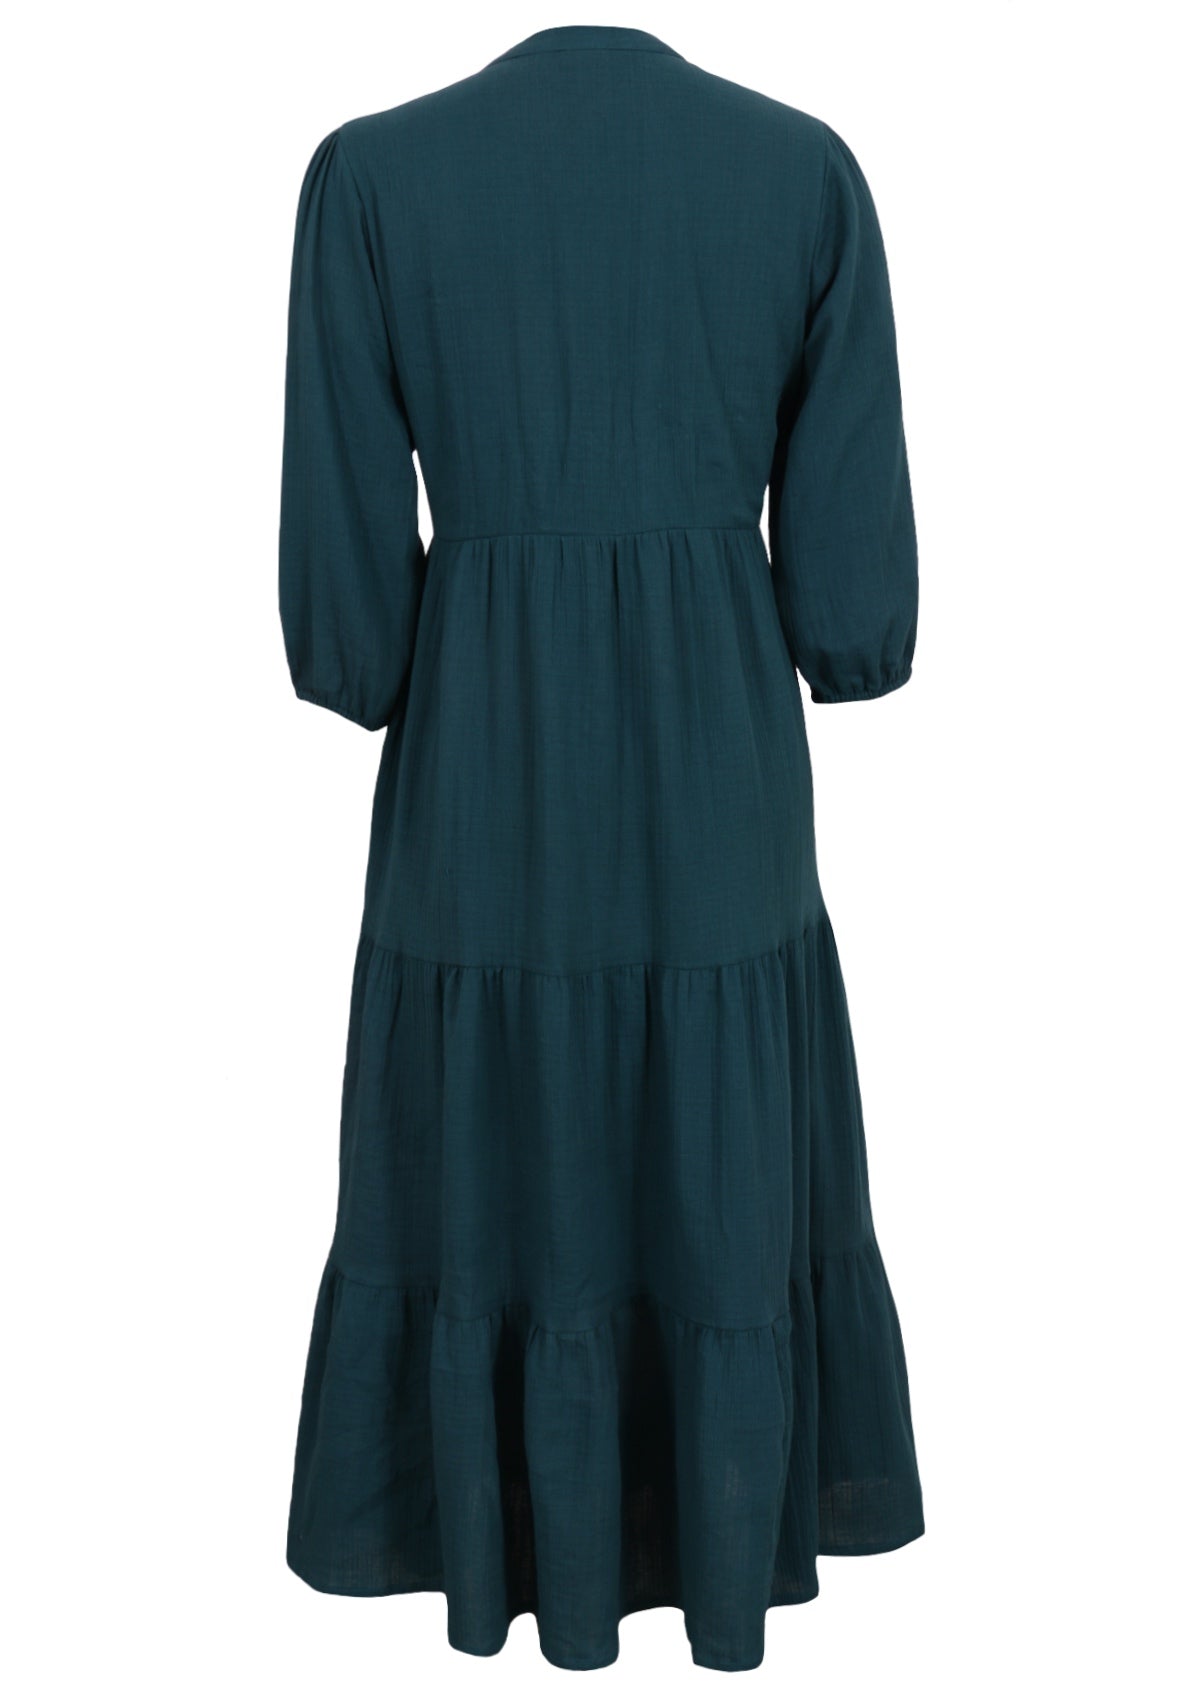 Double cotton relaxed fit maxi dress with tiers, buttoned bodice and 3/4 sleeves